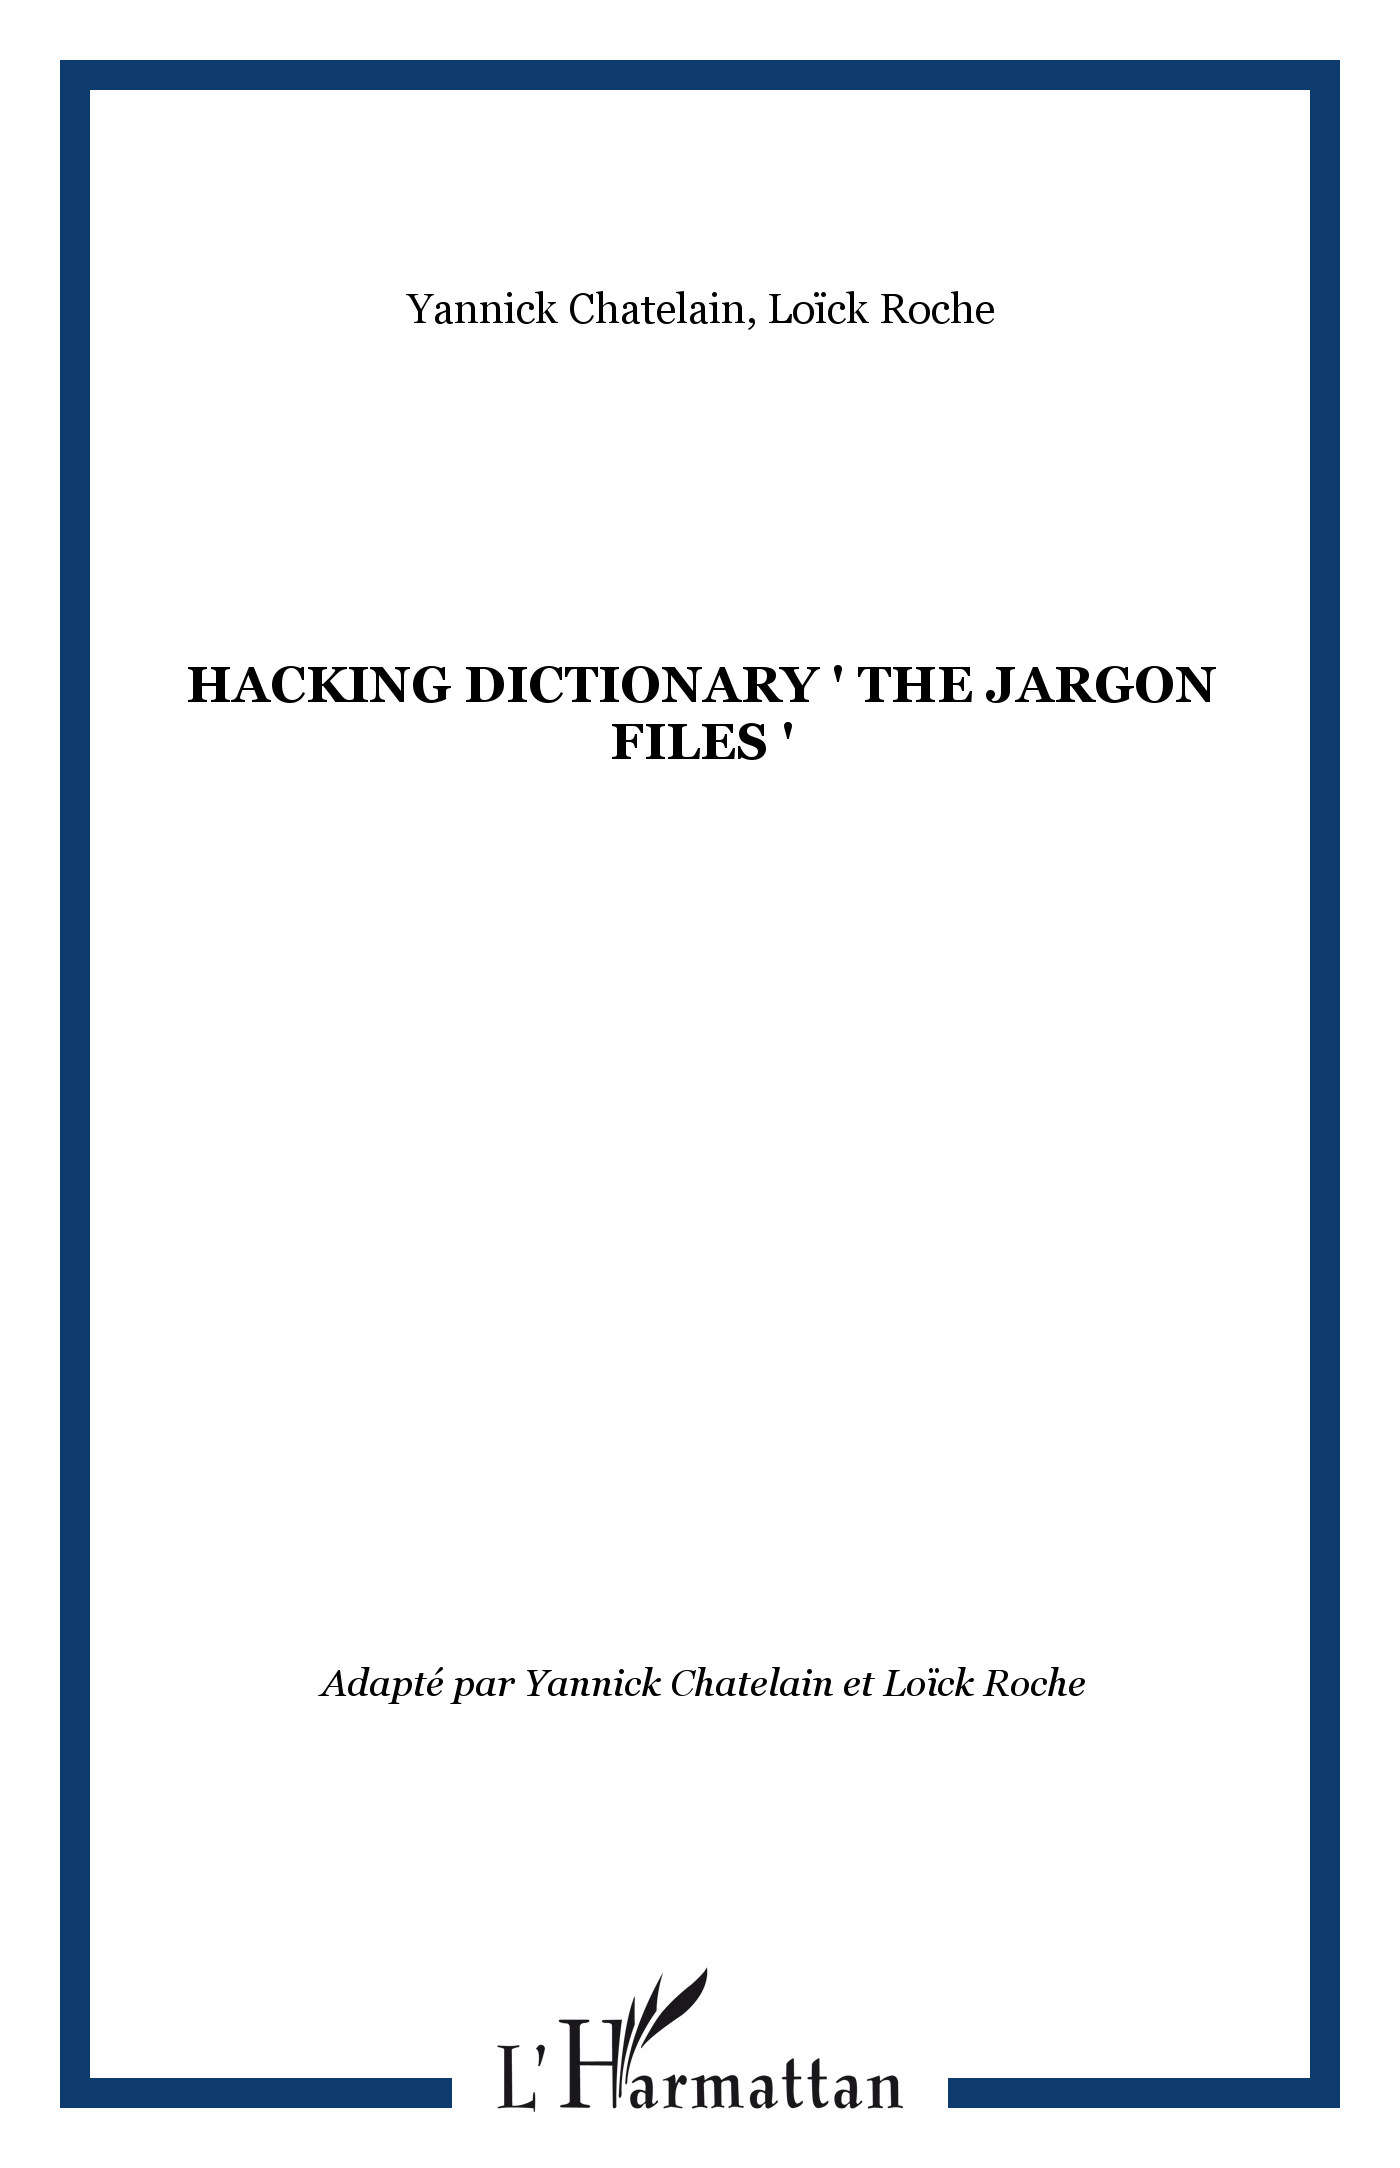 HACKING DICTIONARY " The jargon files " (9782747514477-front-cover)